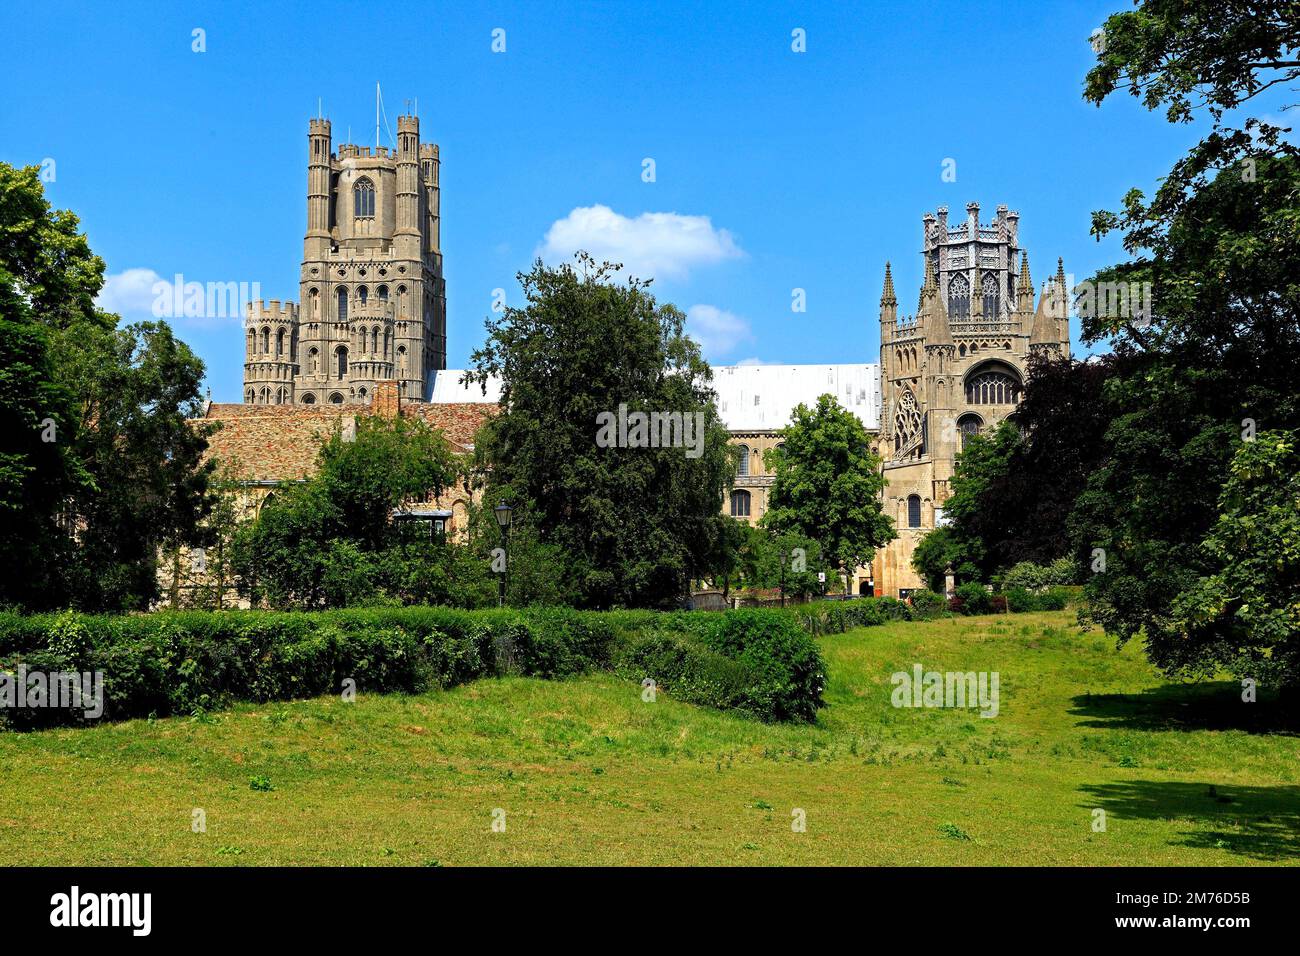 Ely Cathedral, West Tower, Octagon Tower, Lantern Tower, Cambridgeshire, England Stockfoto